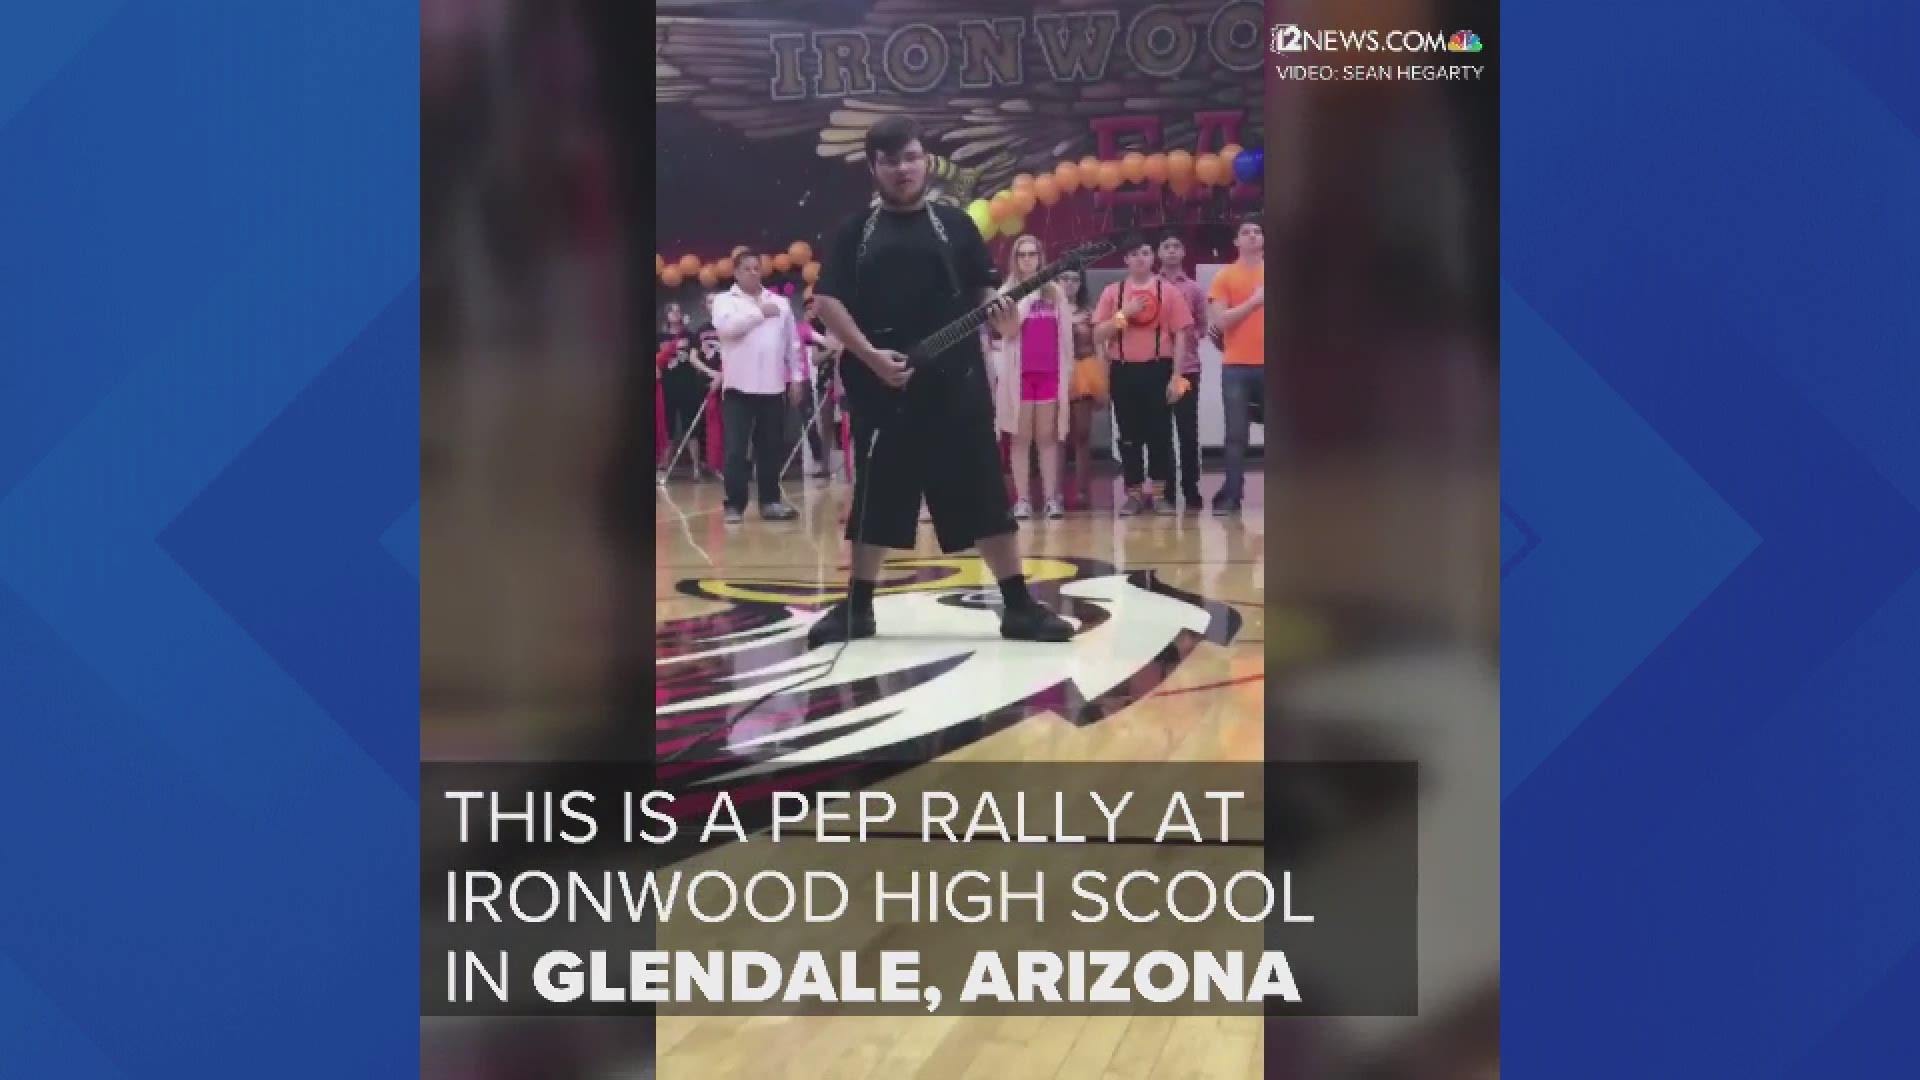 Ridge performed the Star Spangled Banner at a pep rally at Ironwood High School. It was his first public performance ever.